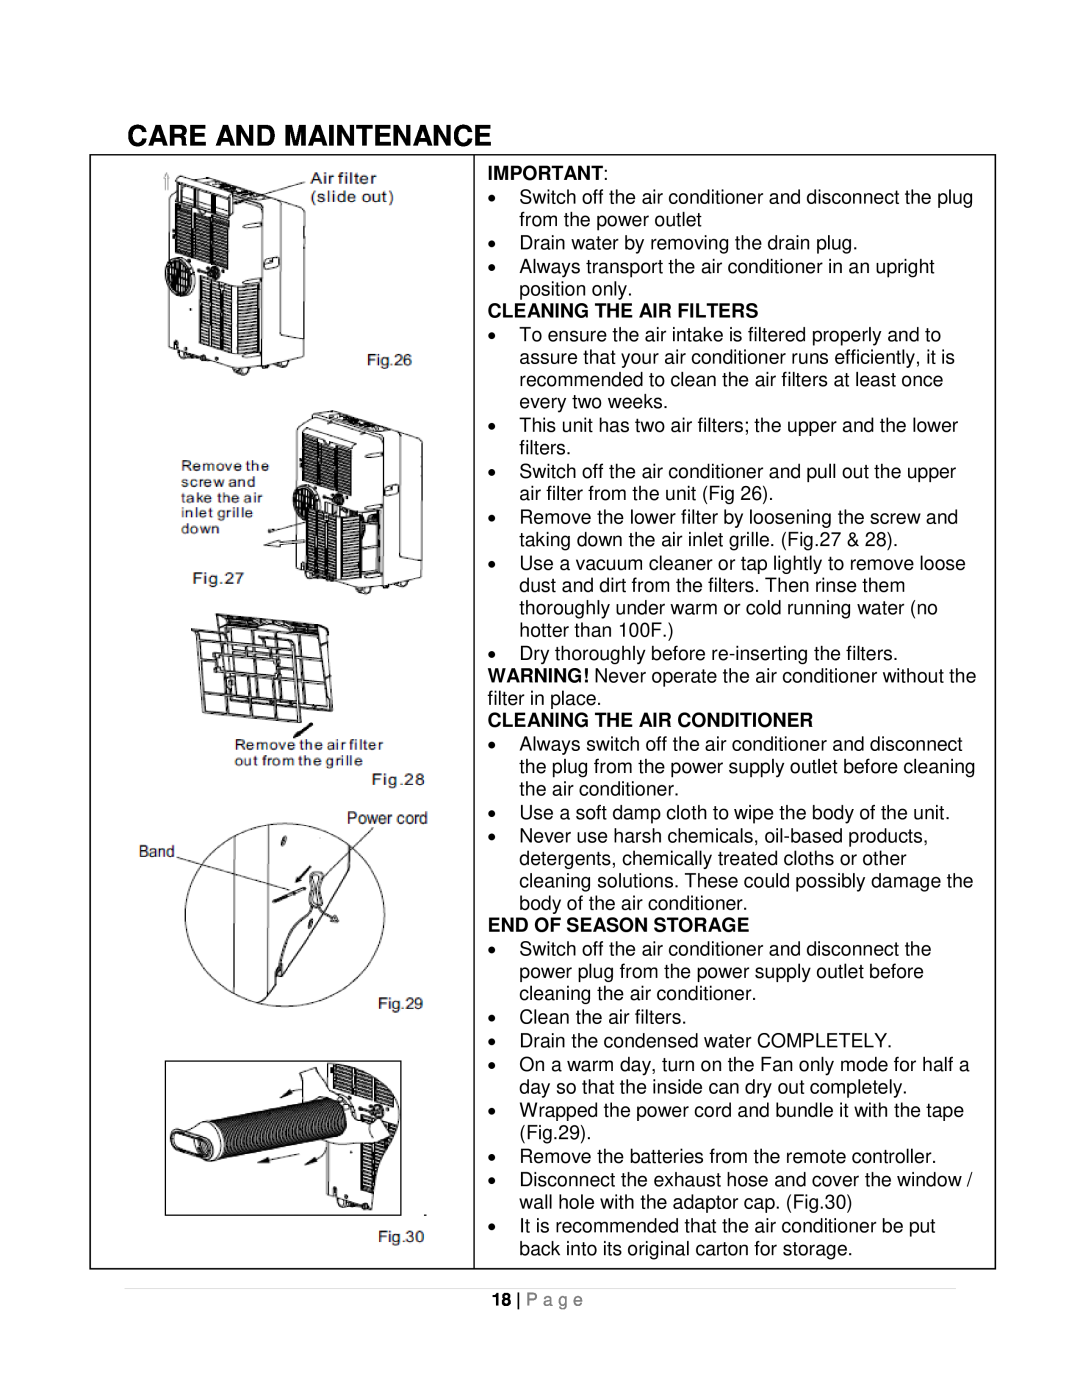 Whynter ARC-10WB Care And Maintenance, Cleaning The Air Filters, Cleaning The Air Conditioner, End Of Season Storage 